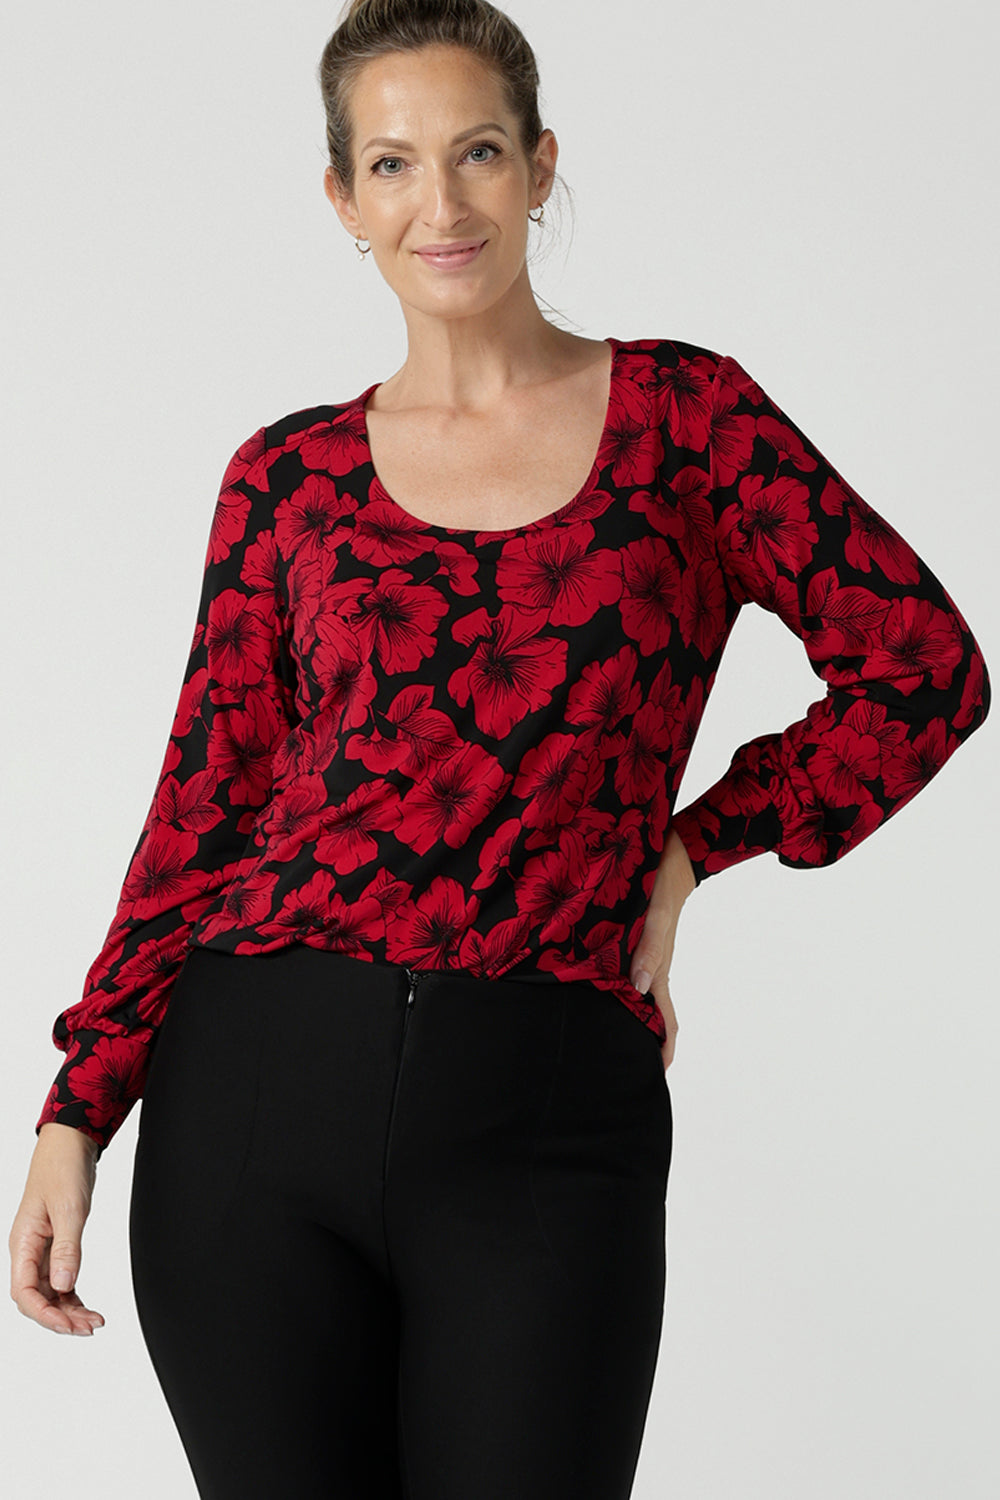 Size 10 woman wears the scoop neck bold poppy top with balloon sleeves. Curved hemline and cuffed sleeves. Made in Australia for women size 8 - 24. 